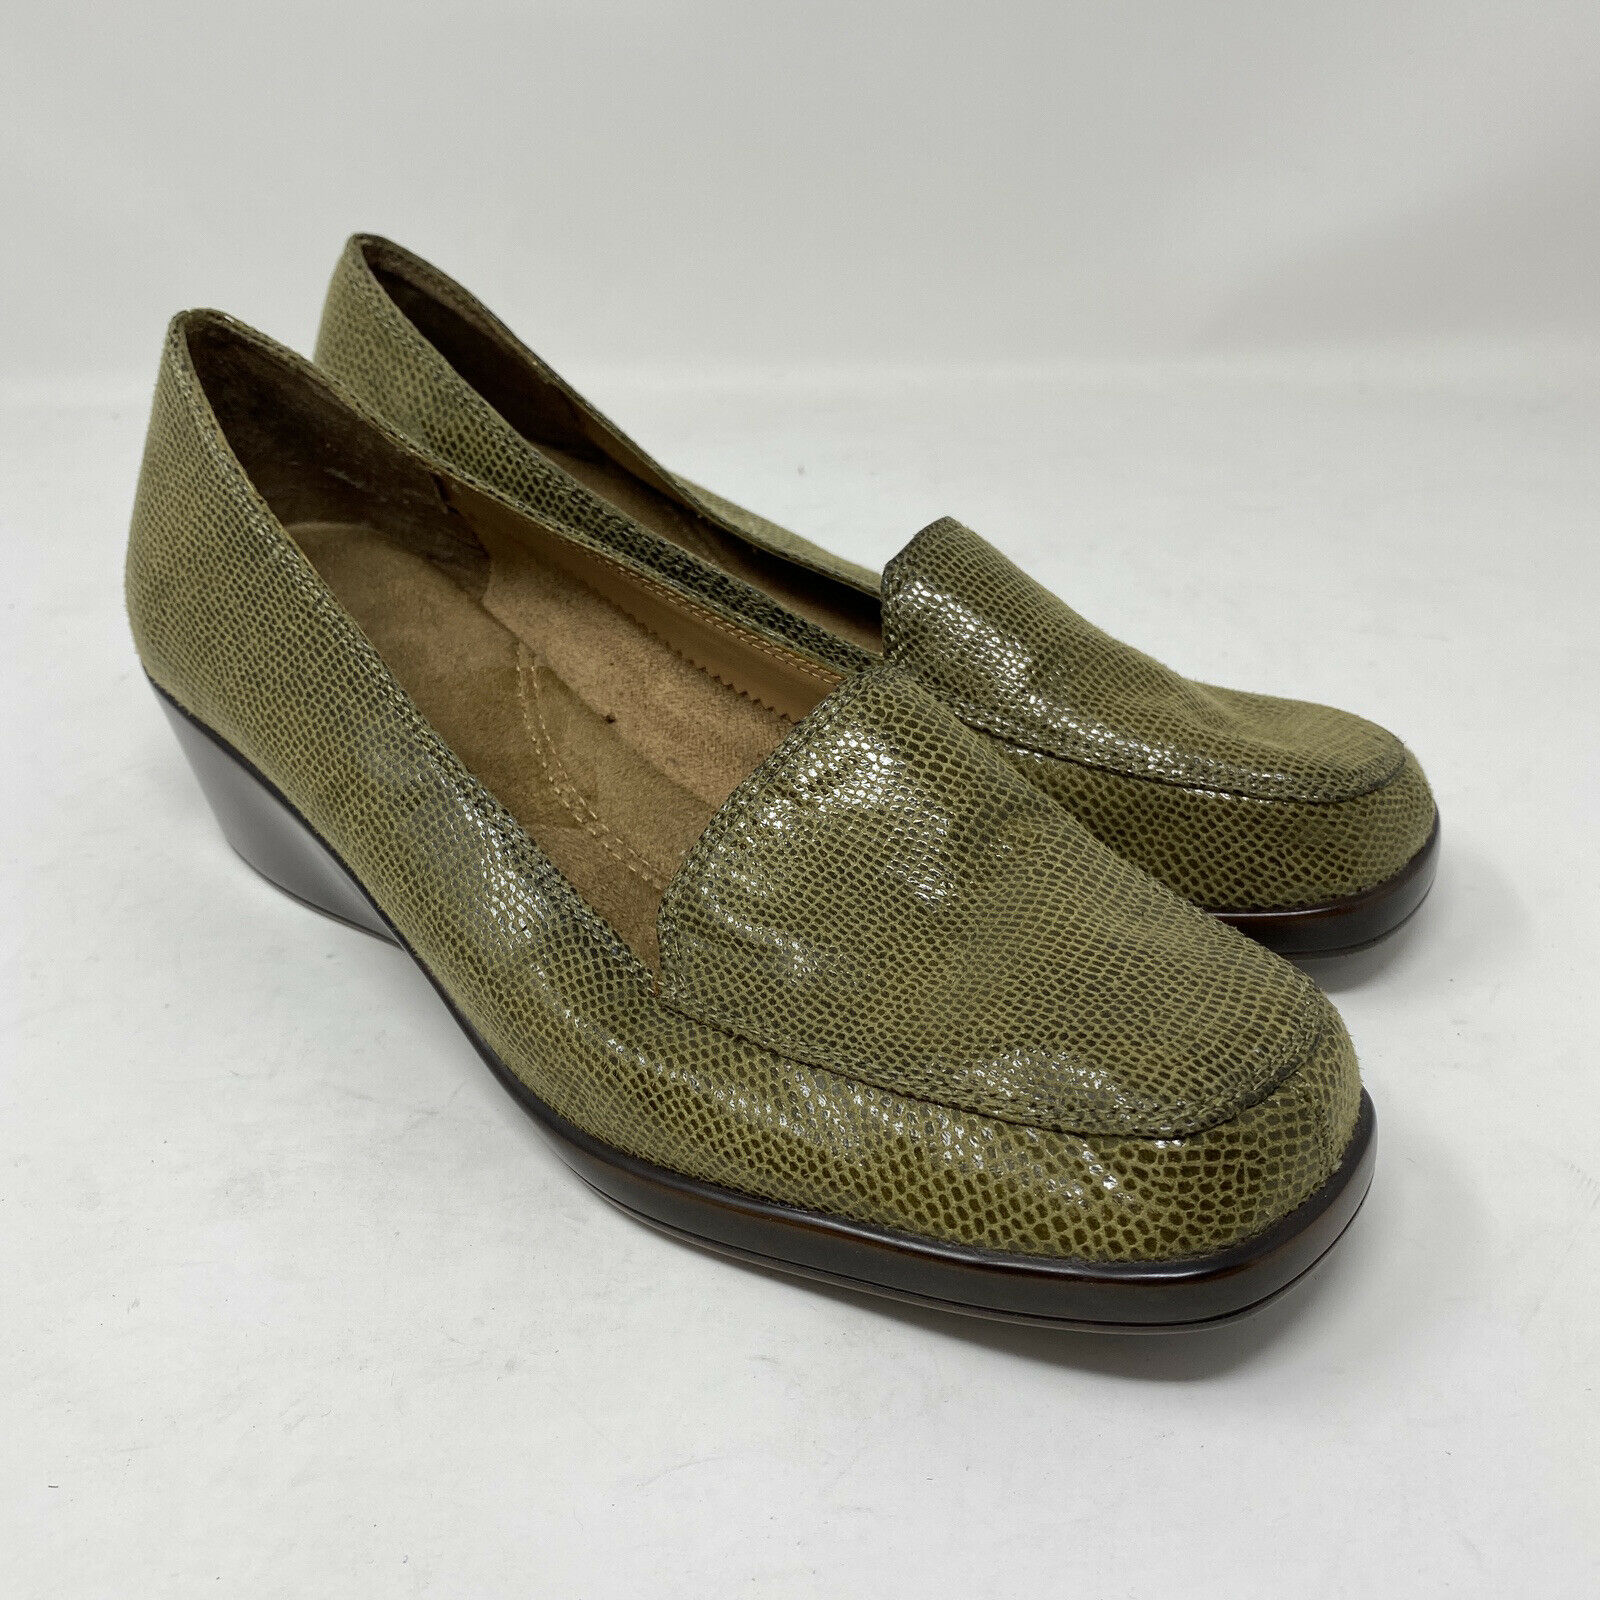 Aerosoles Women’s Loafer Shoes Green Size 7.5 M Final Exam Wedge Slip On Comfort